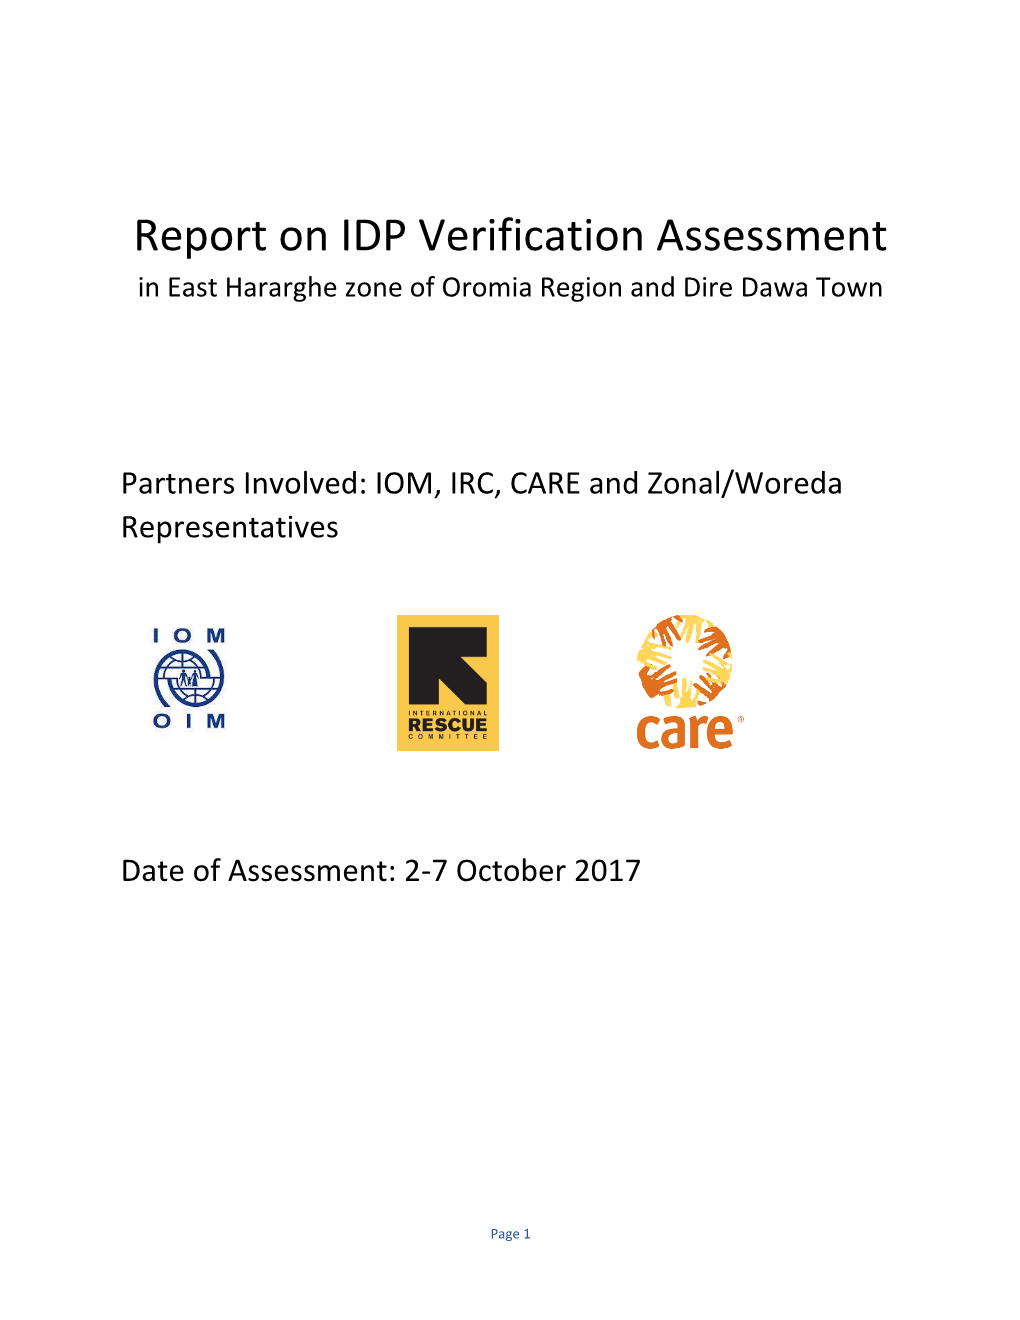 Report on IDP Verification Assessment in East Hararghe Zone of Oromia Region and Dire Dawa Town